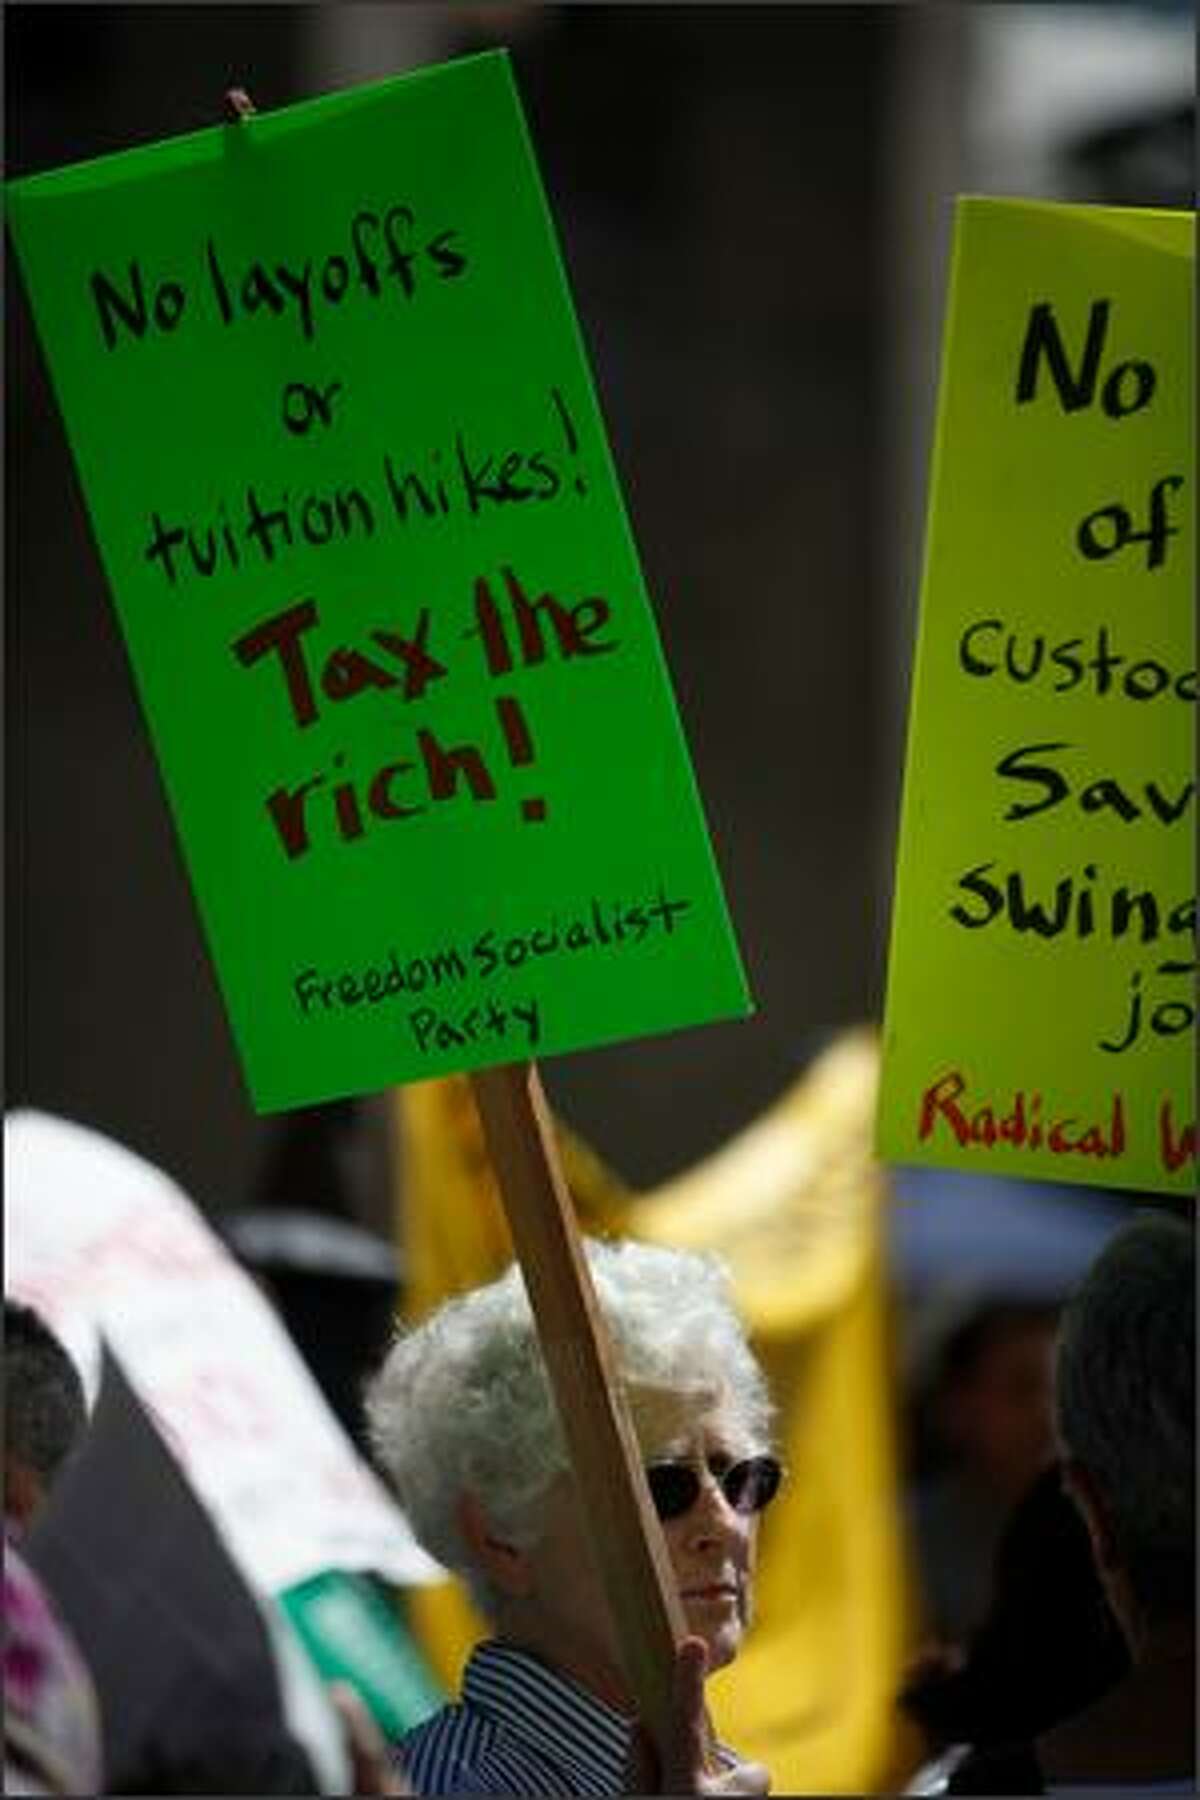 Protesters hold signs in Red Square during a rally against budget cuts and custodial swing shift eliminations at the University of Washington in Seattle, Wash. (May 28, 2009)